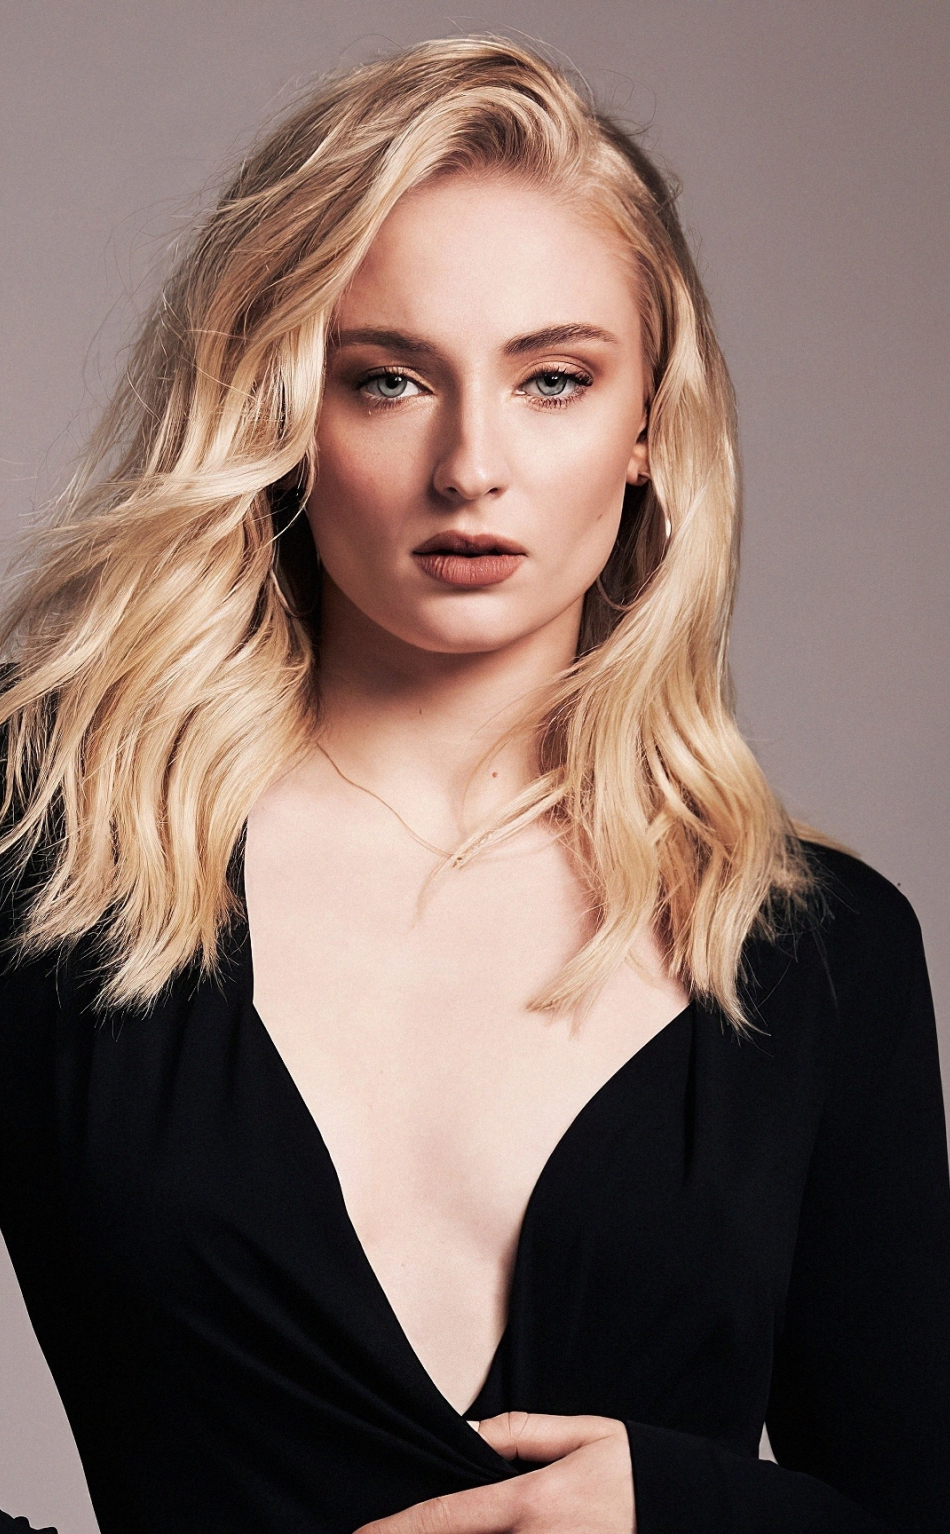 Download wallpaper 950x1534 hot and beautiful, black dress, sophie turner,  iphone, 950x1534 hd background, 23778